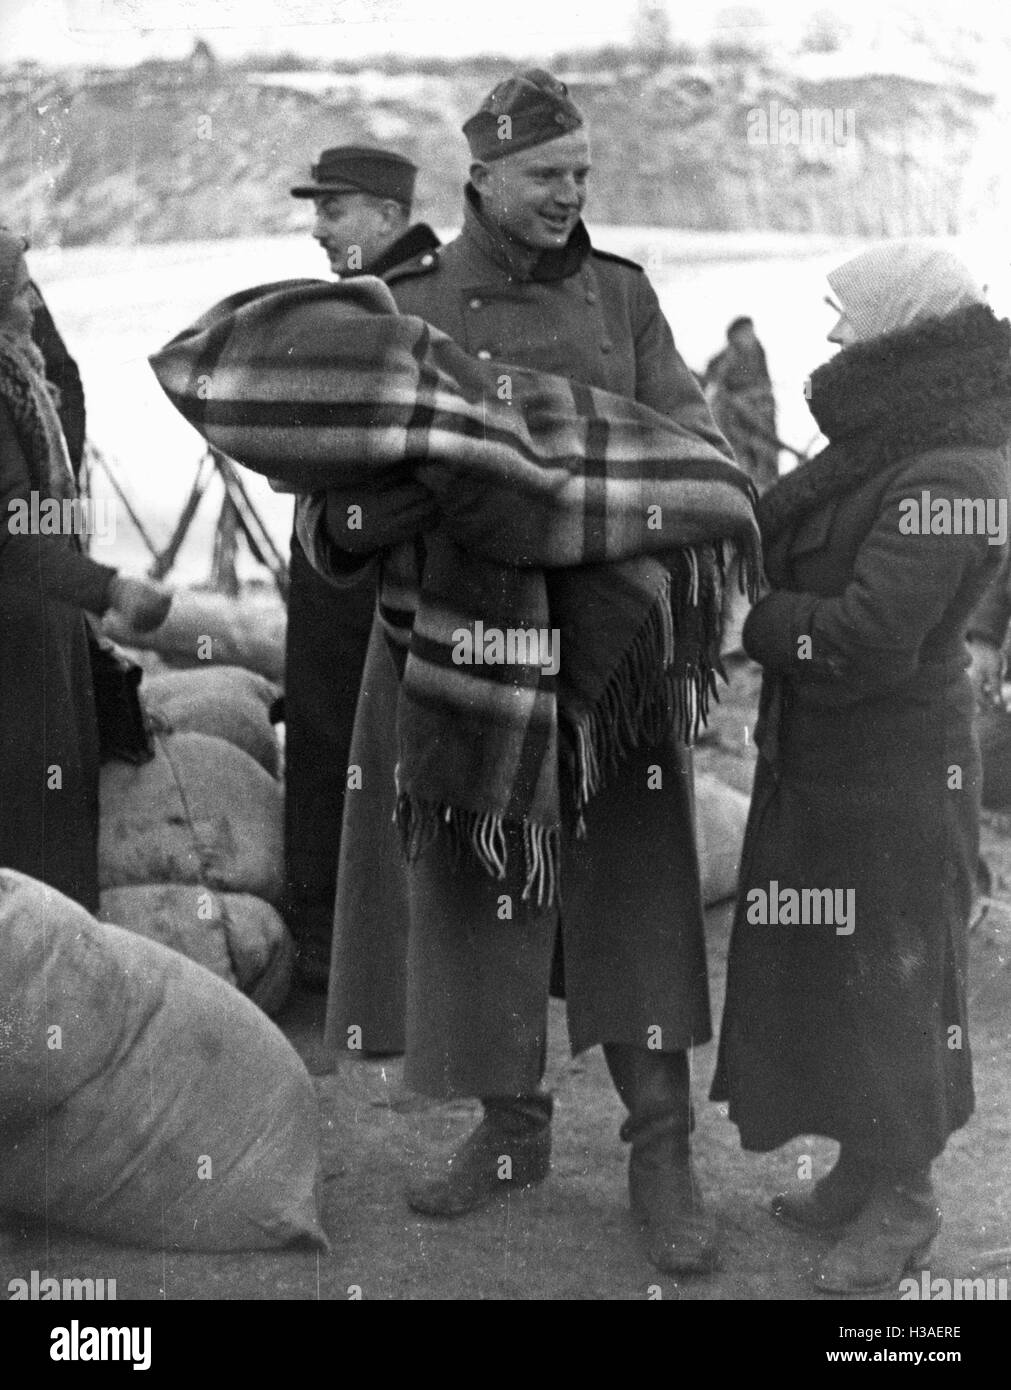 Soldier with Volhynian Germans, 1939 Stock Photo